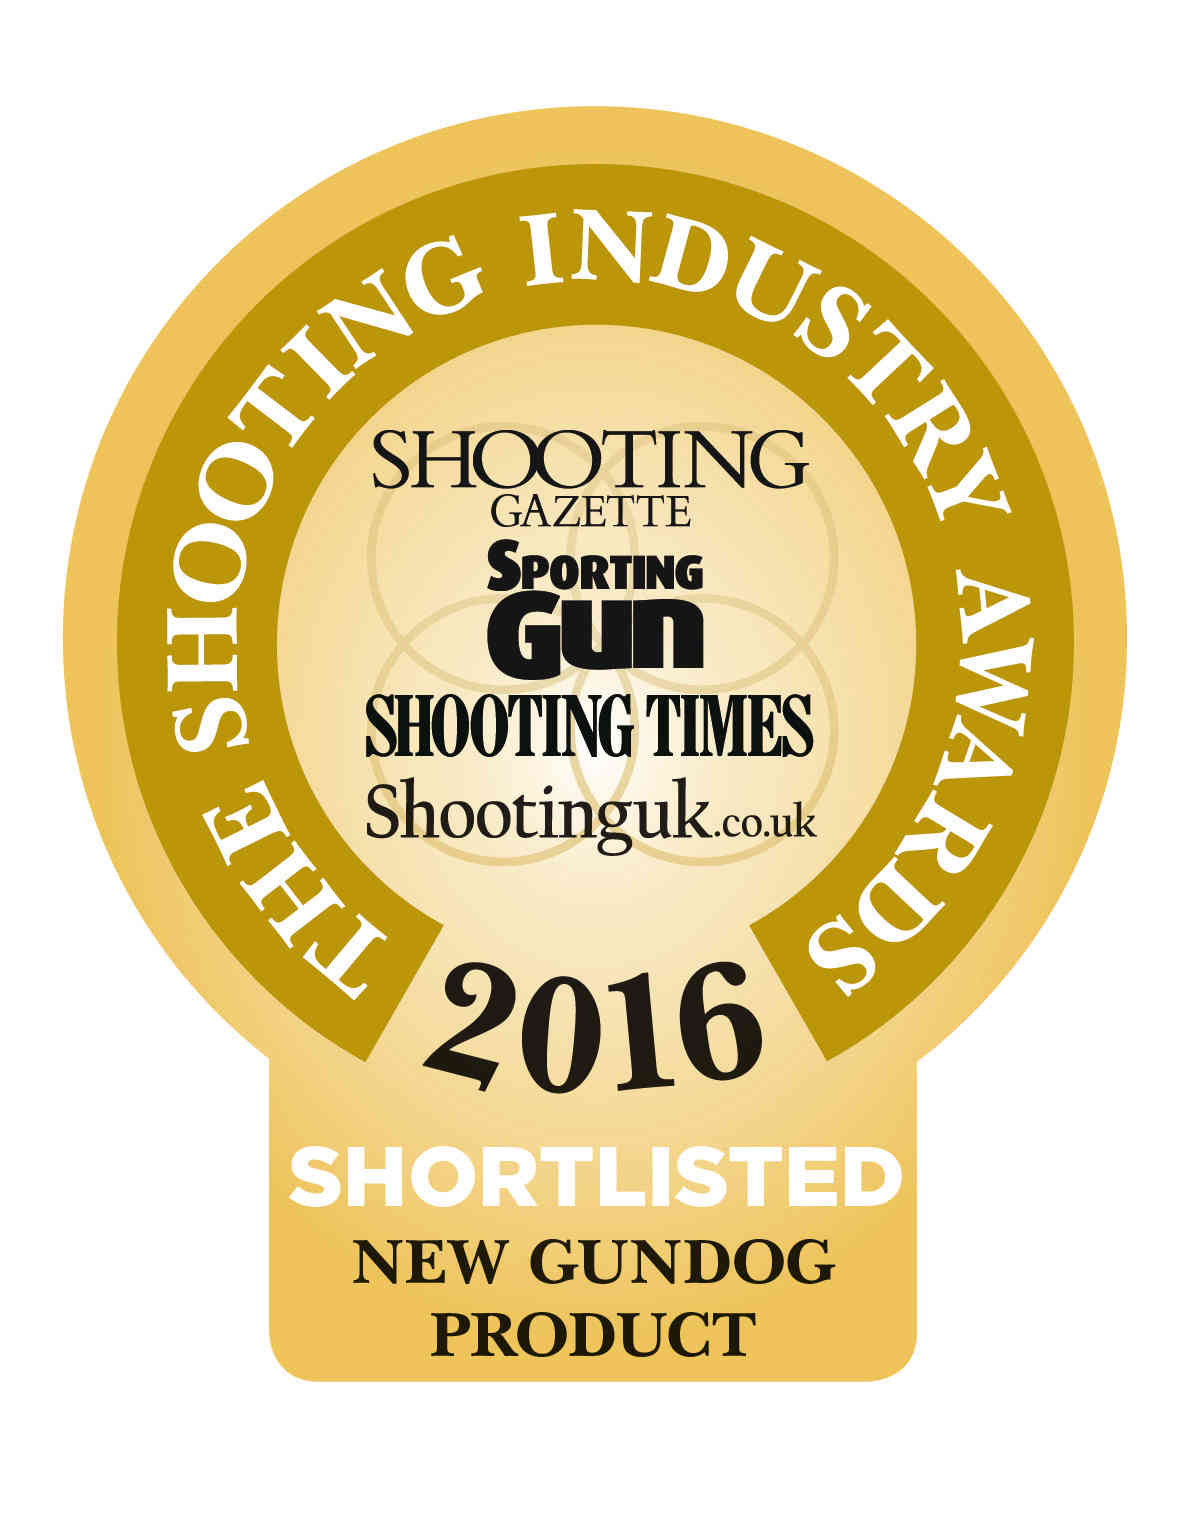 The Retrieving Roll was shortlisted at the Shooting Industry Awards